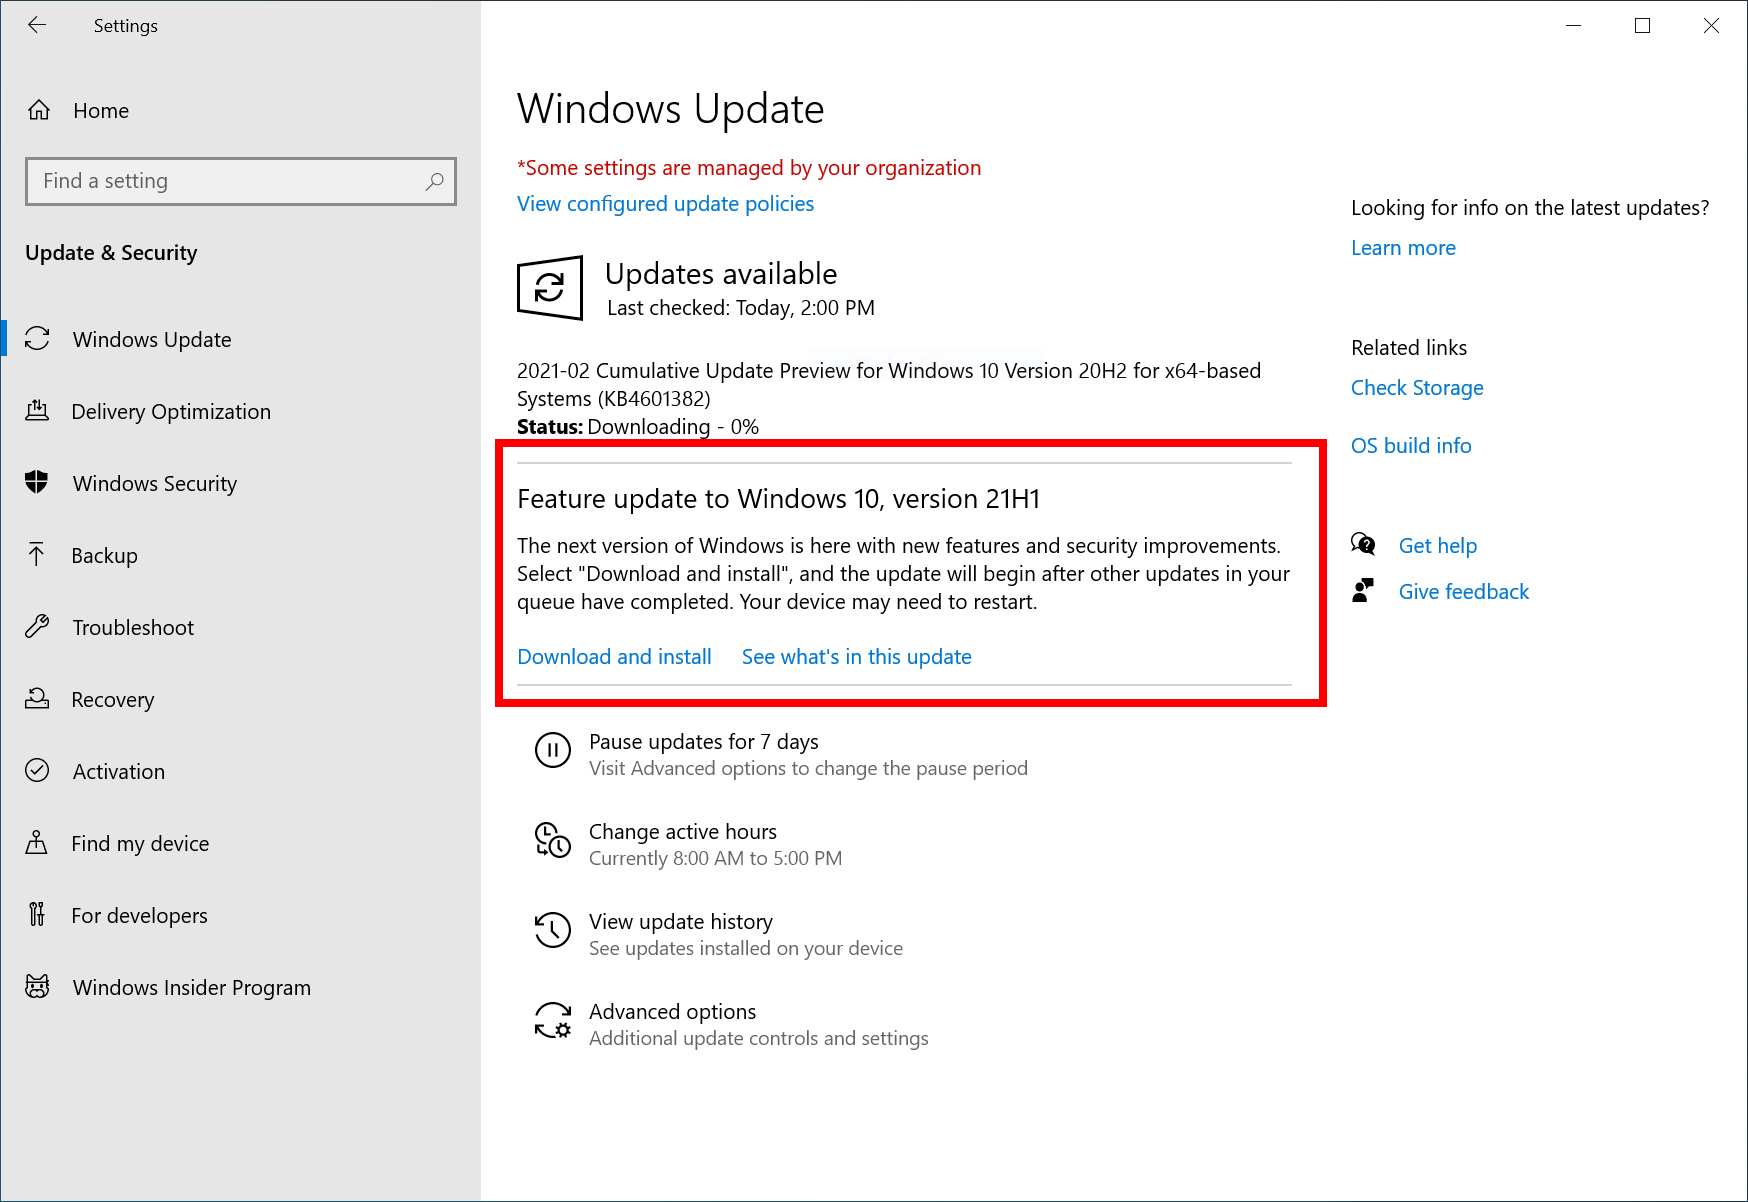 Windows 10 21H1 available to insiders now Capture.png